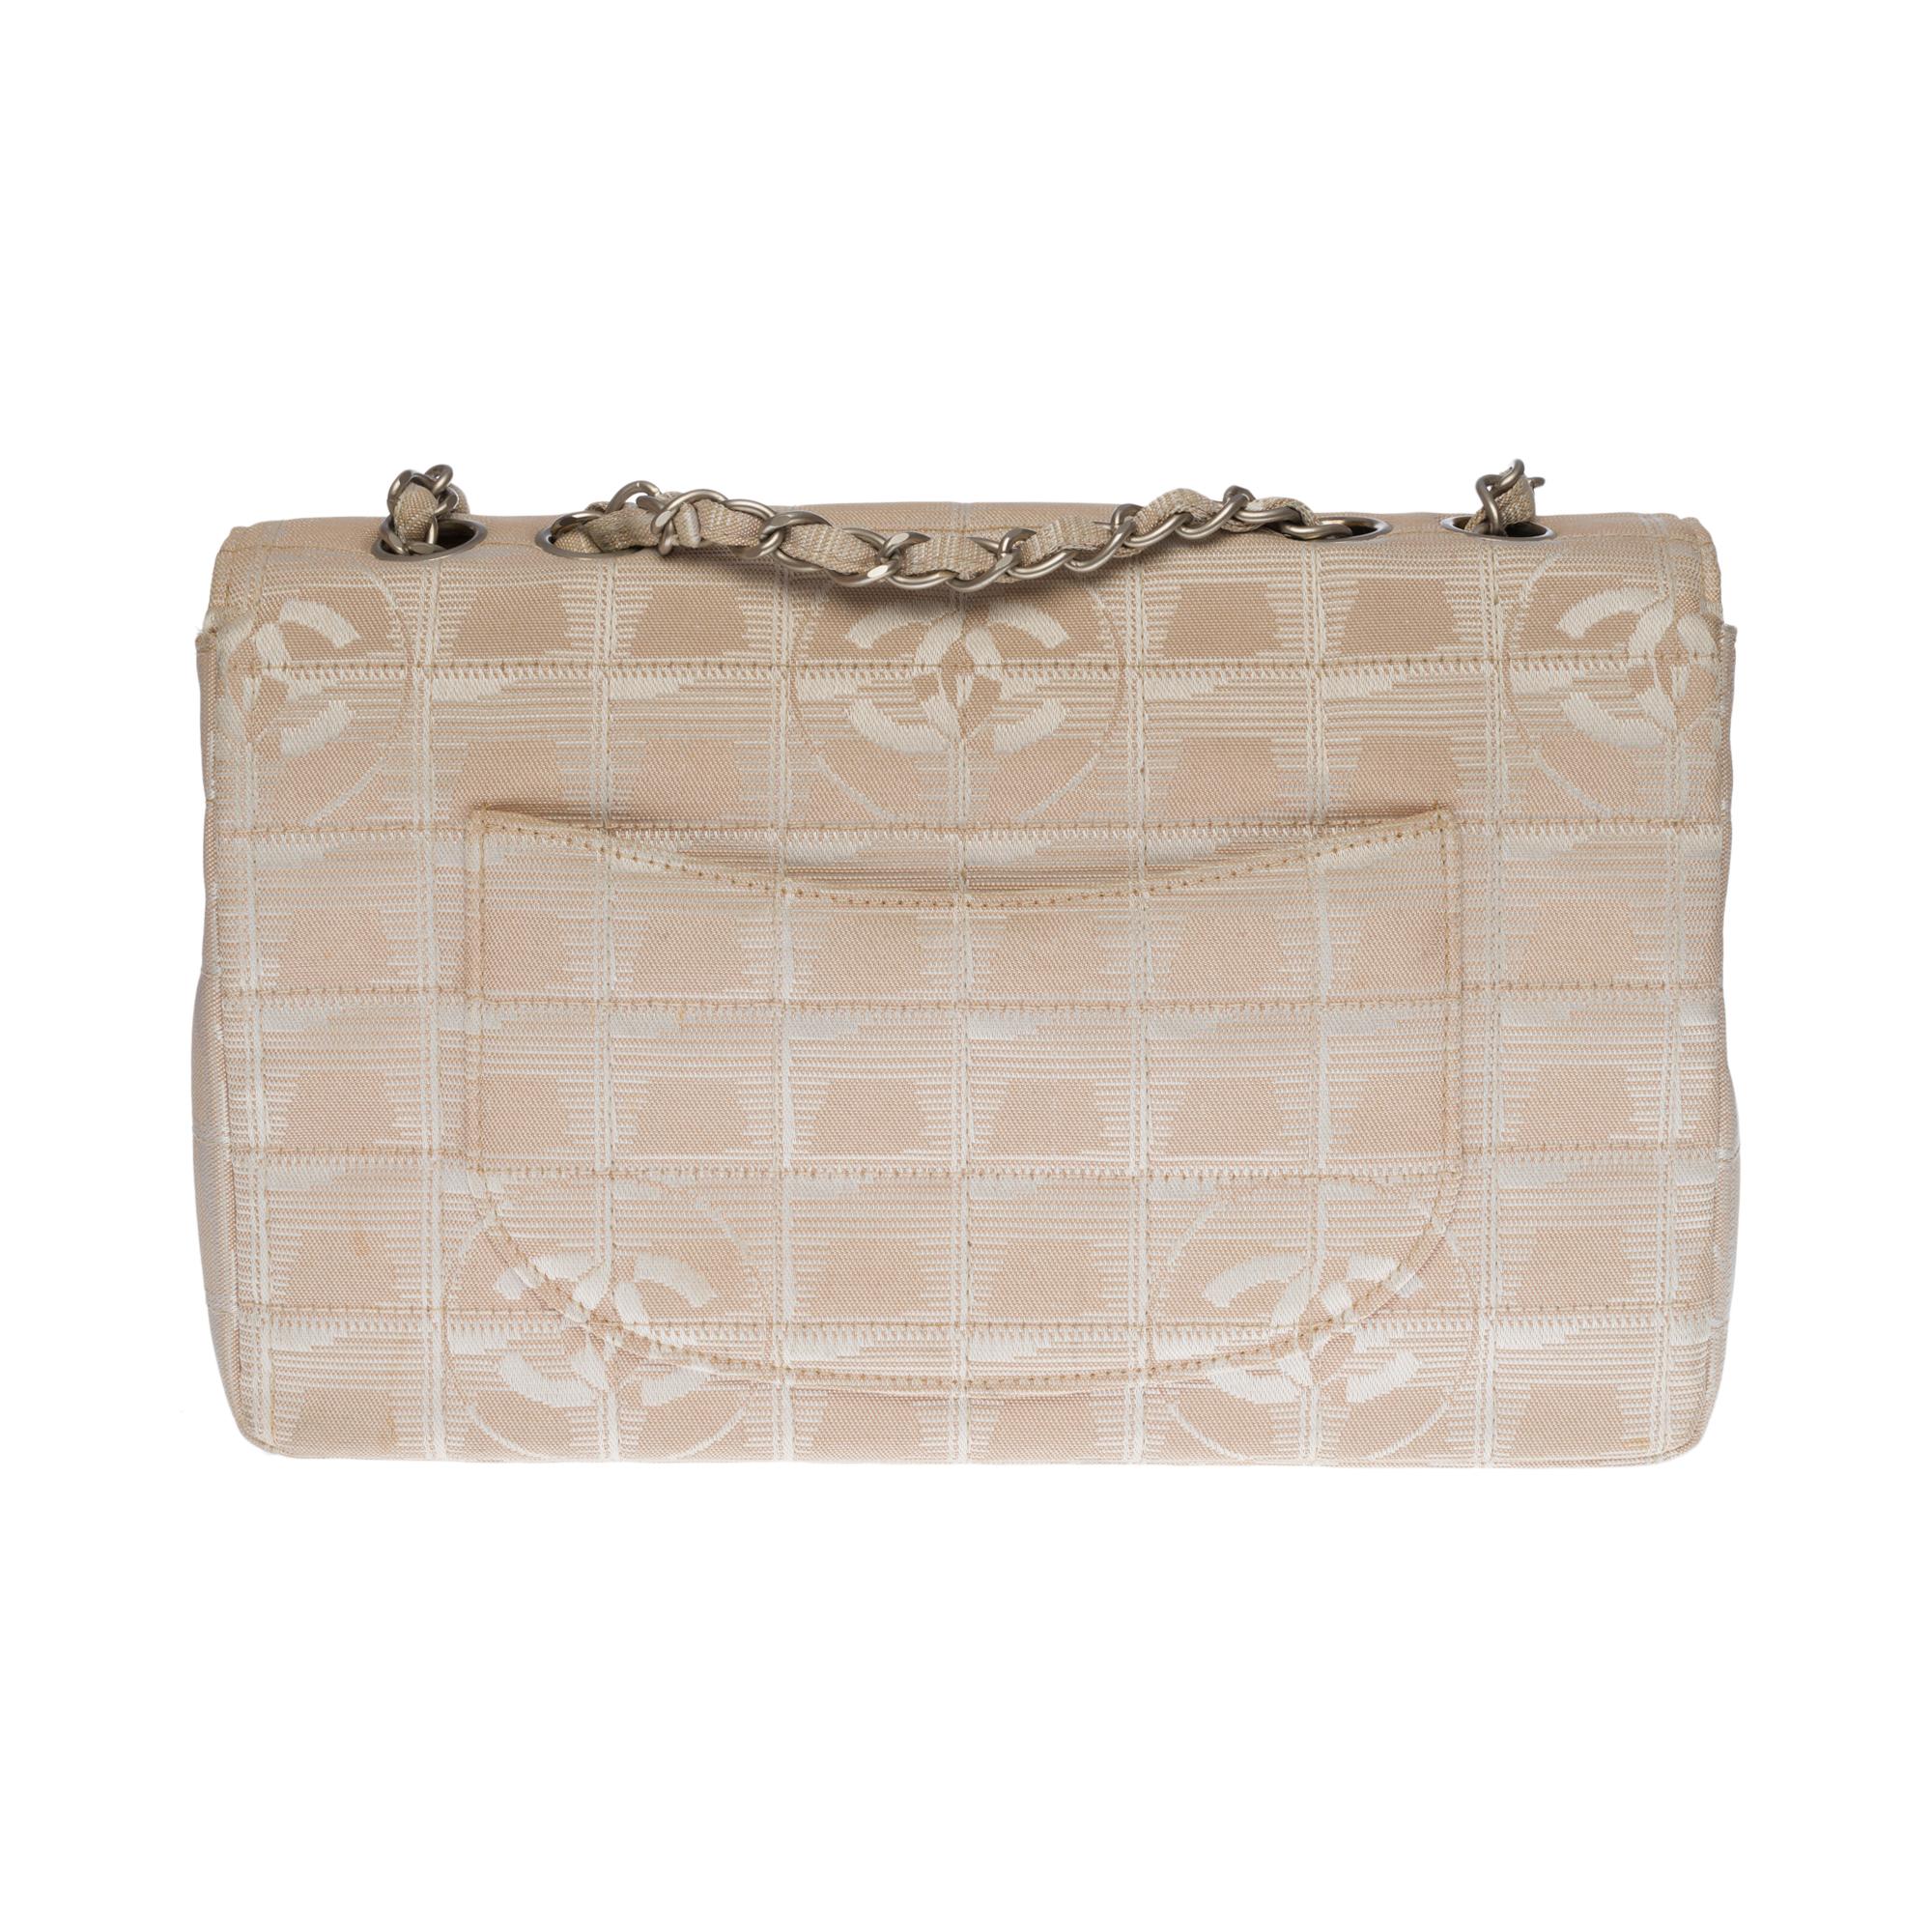 Beautiful Handbag Chanel Timeless/Classique Travel Line flap bag in beige woven nylon, matte silver metal hardware, a chain handle in matte silver metal intertwined with beige nylon allowing a hand or shoulder support
Matte silver metal flap